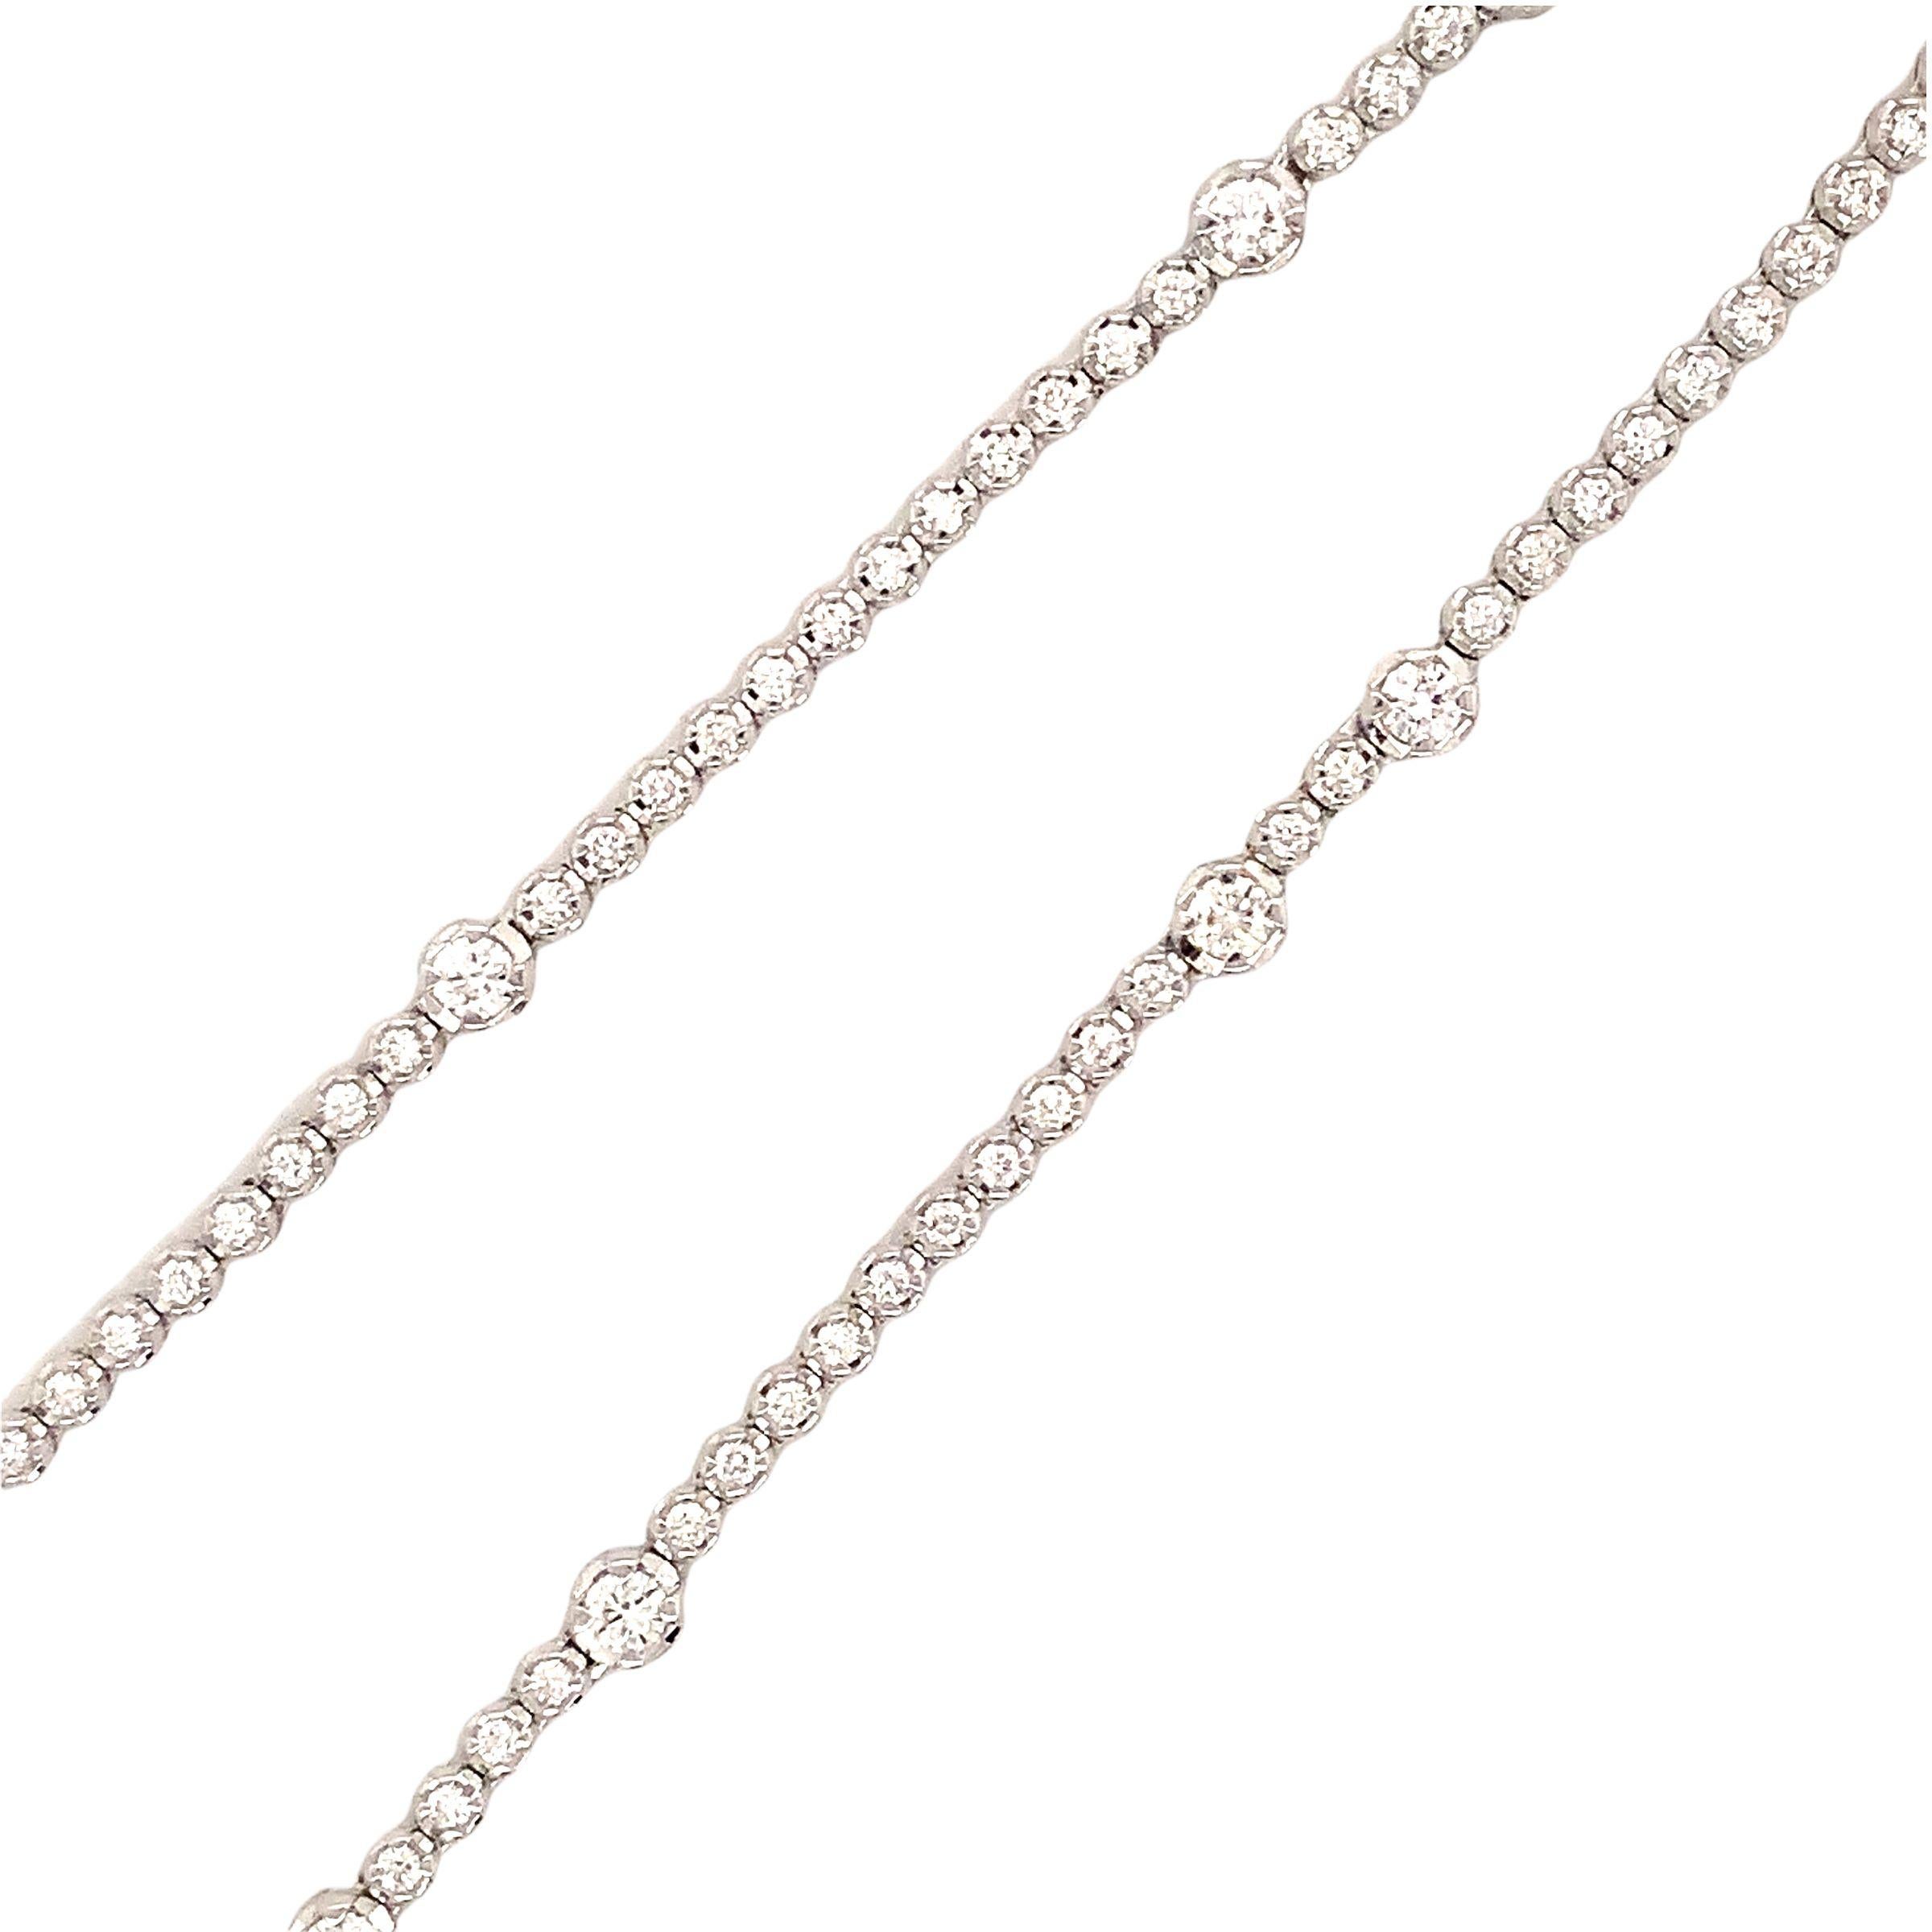 Contemporary Link Collection Opera Length Diamond Chain Necklace 3.66cts. Tw Set in 18k For Sale